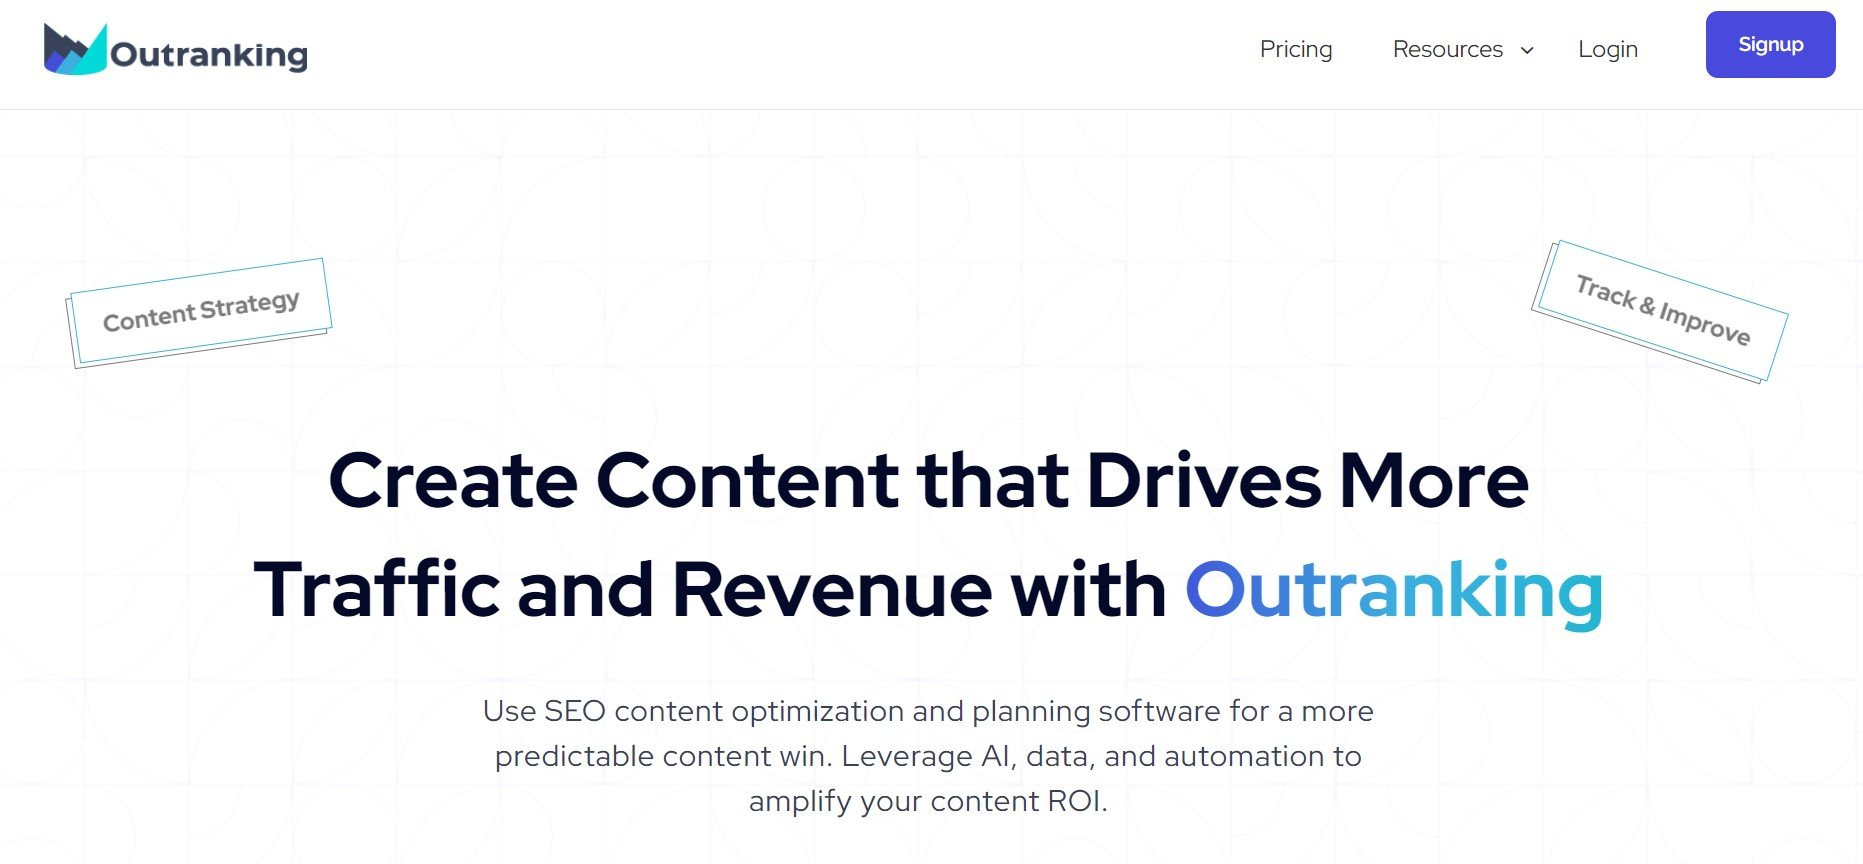 Outranking is among the best AI SEO tools on the market.